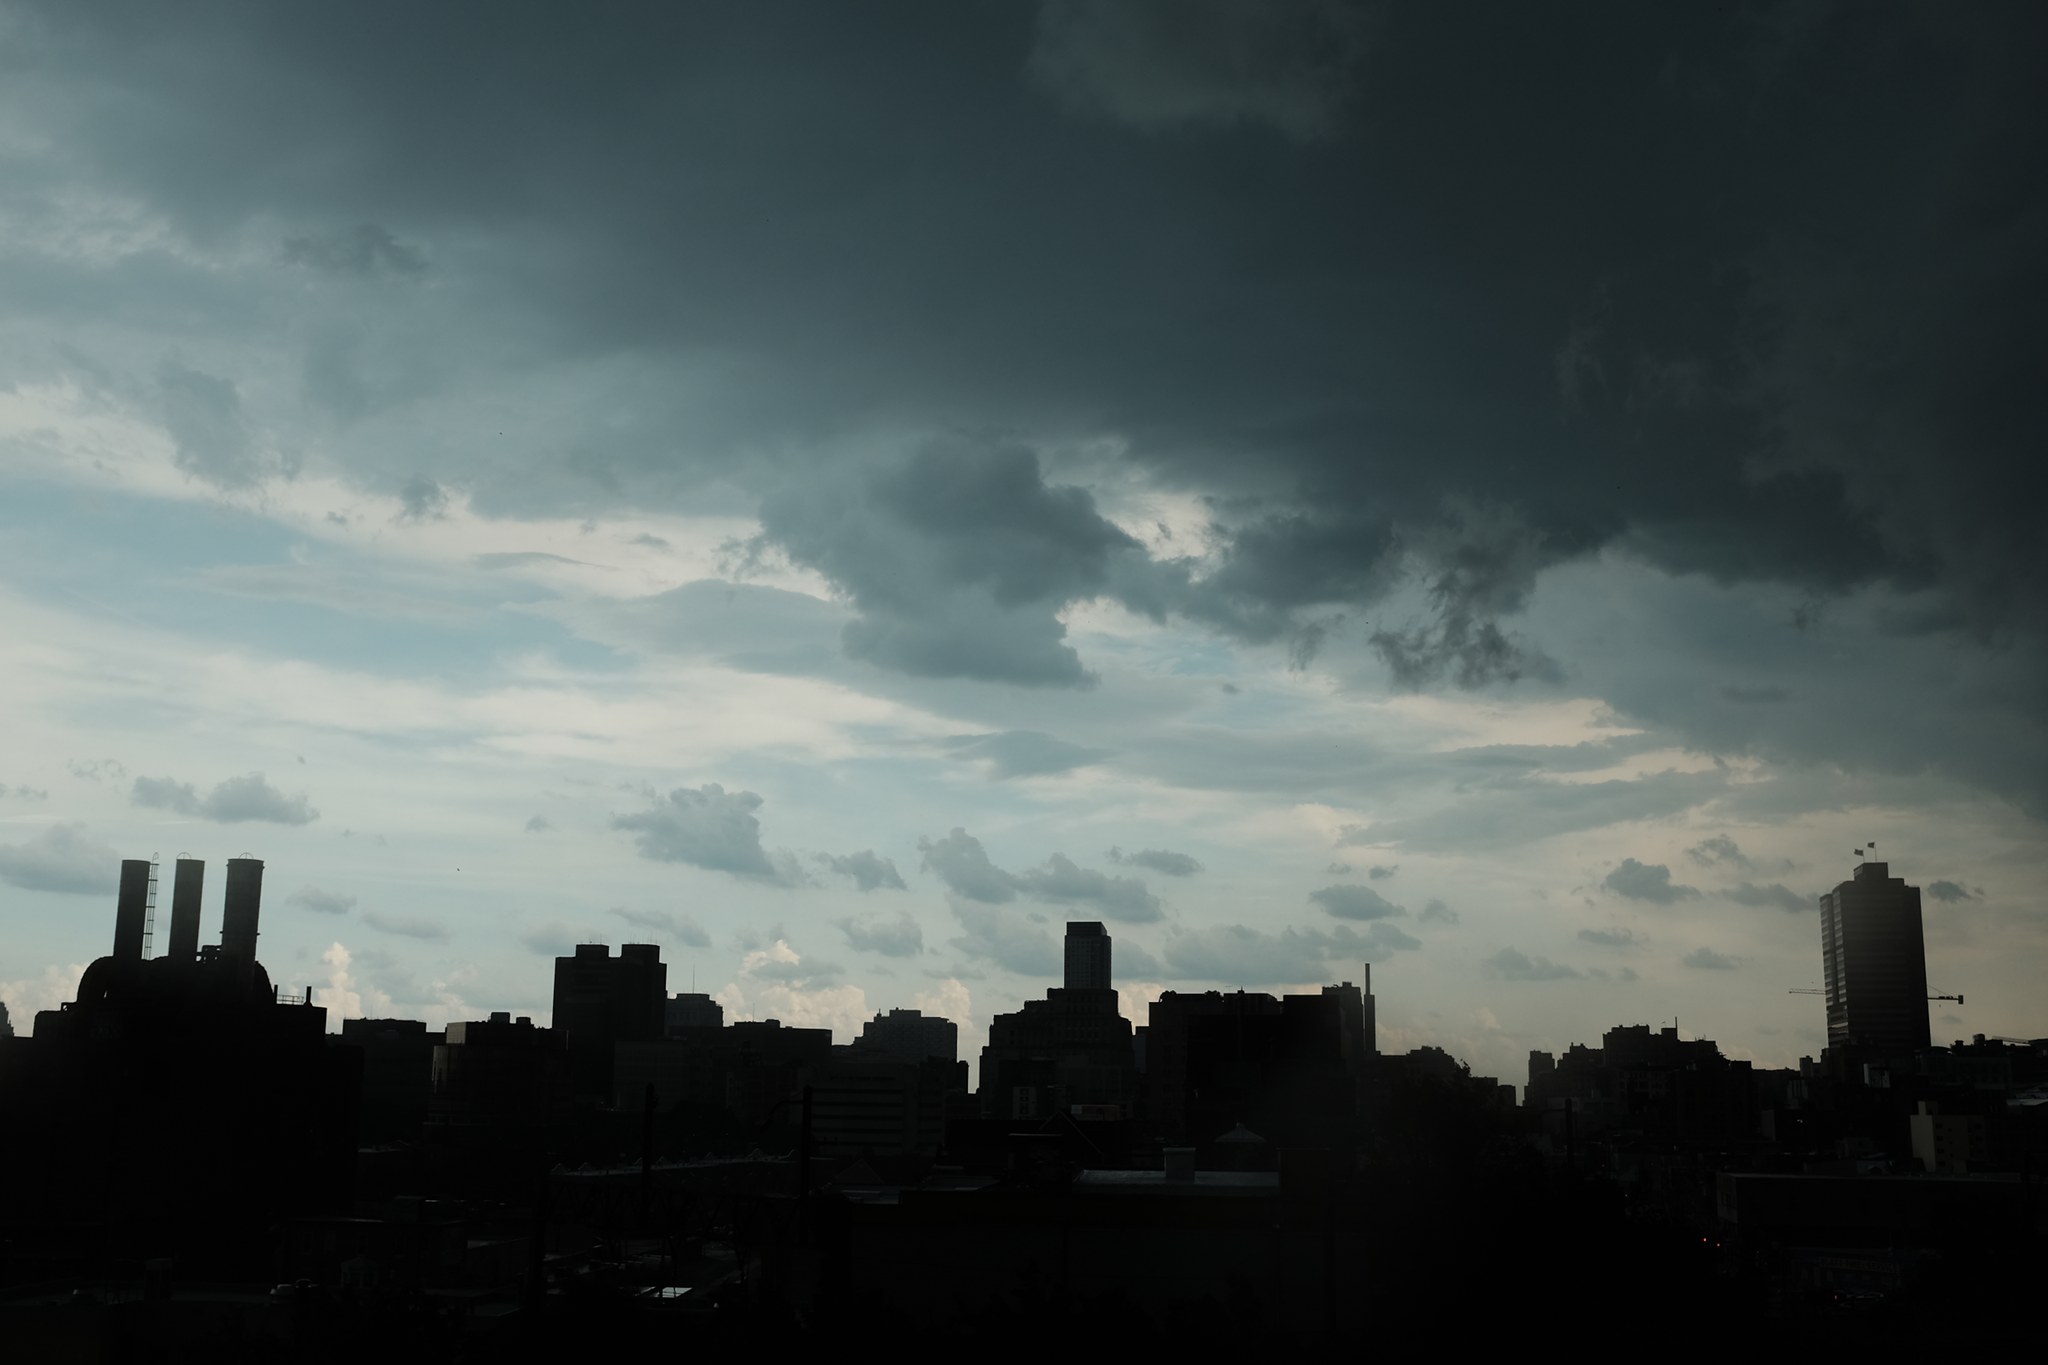 A small part of Philly's skyline after a storm